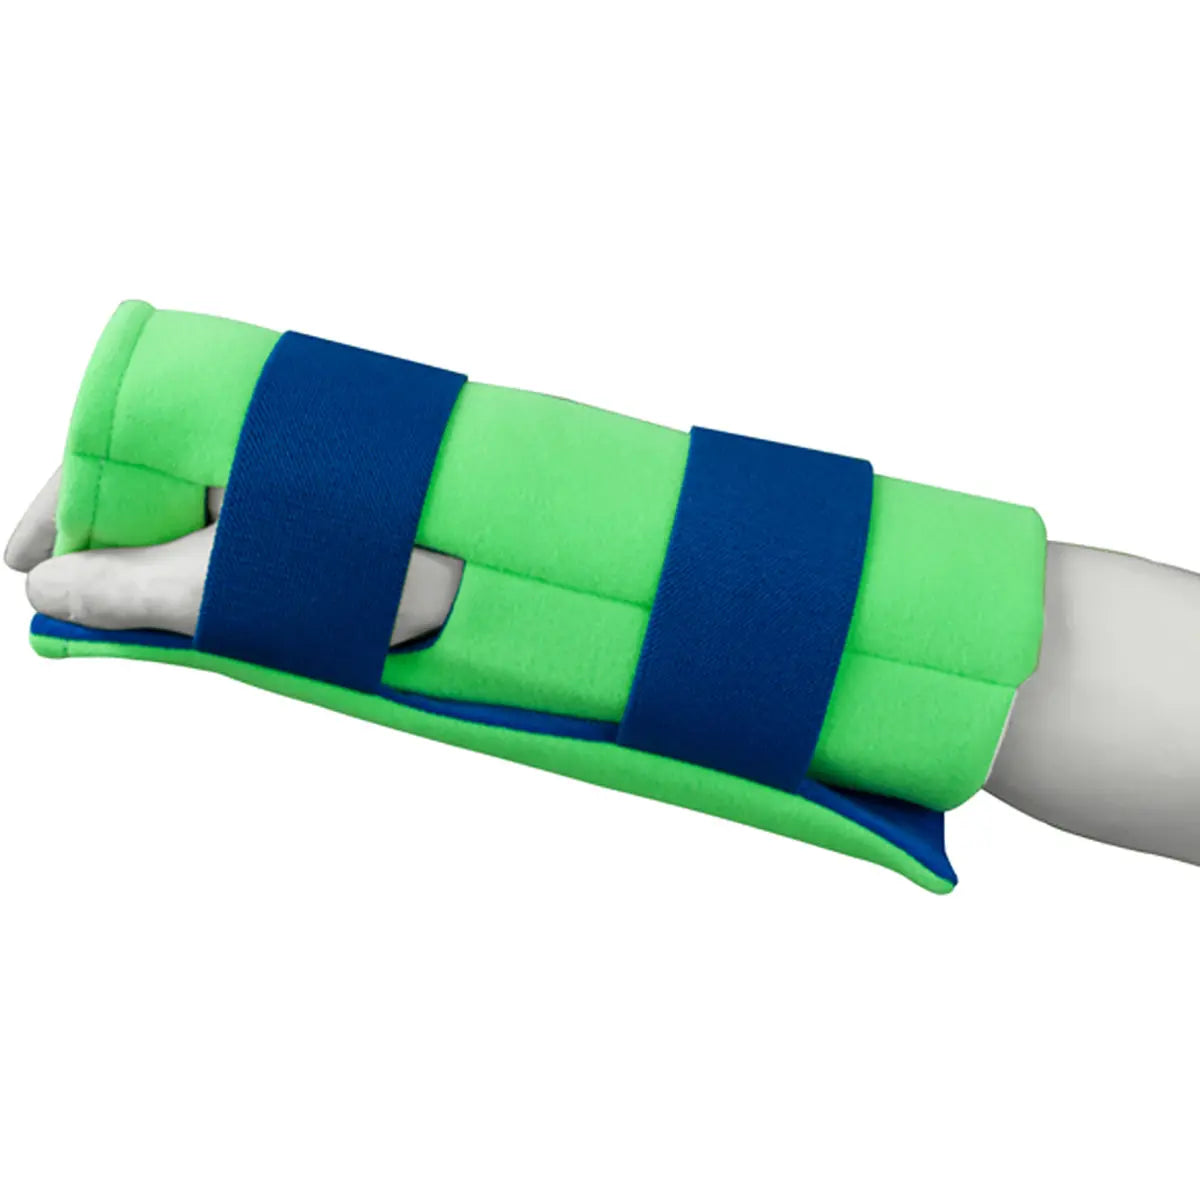 Polar Ice Wrist and Elbow Wrap - Universal - Cryotherapy Cold Therapy Pack Polar Ice